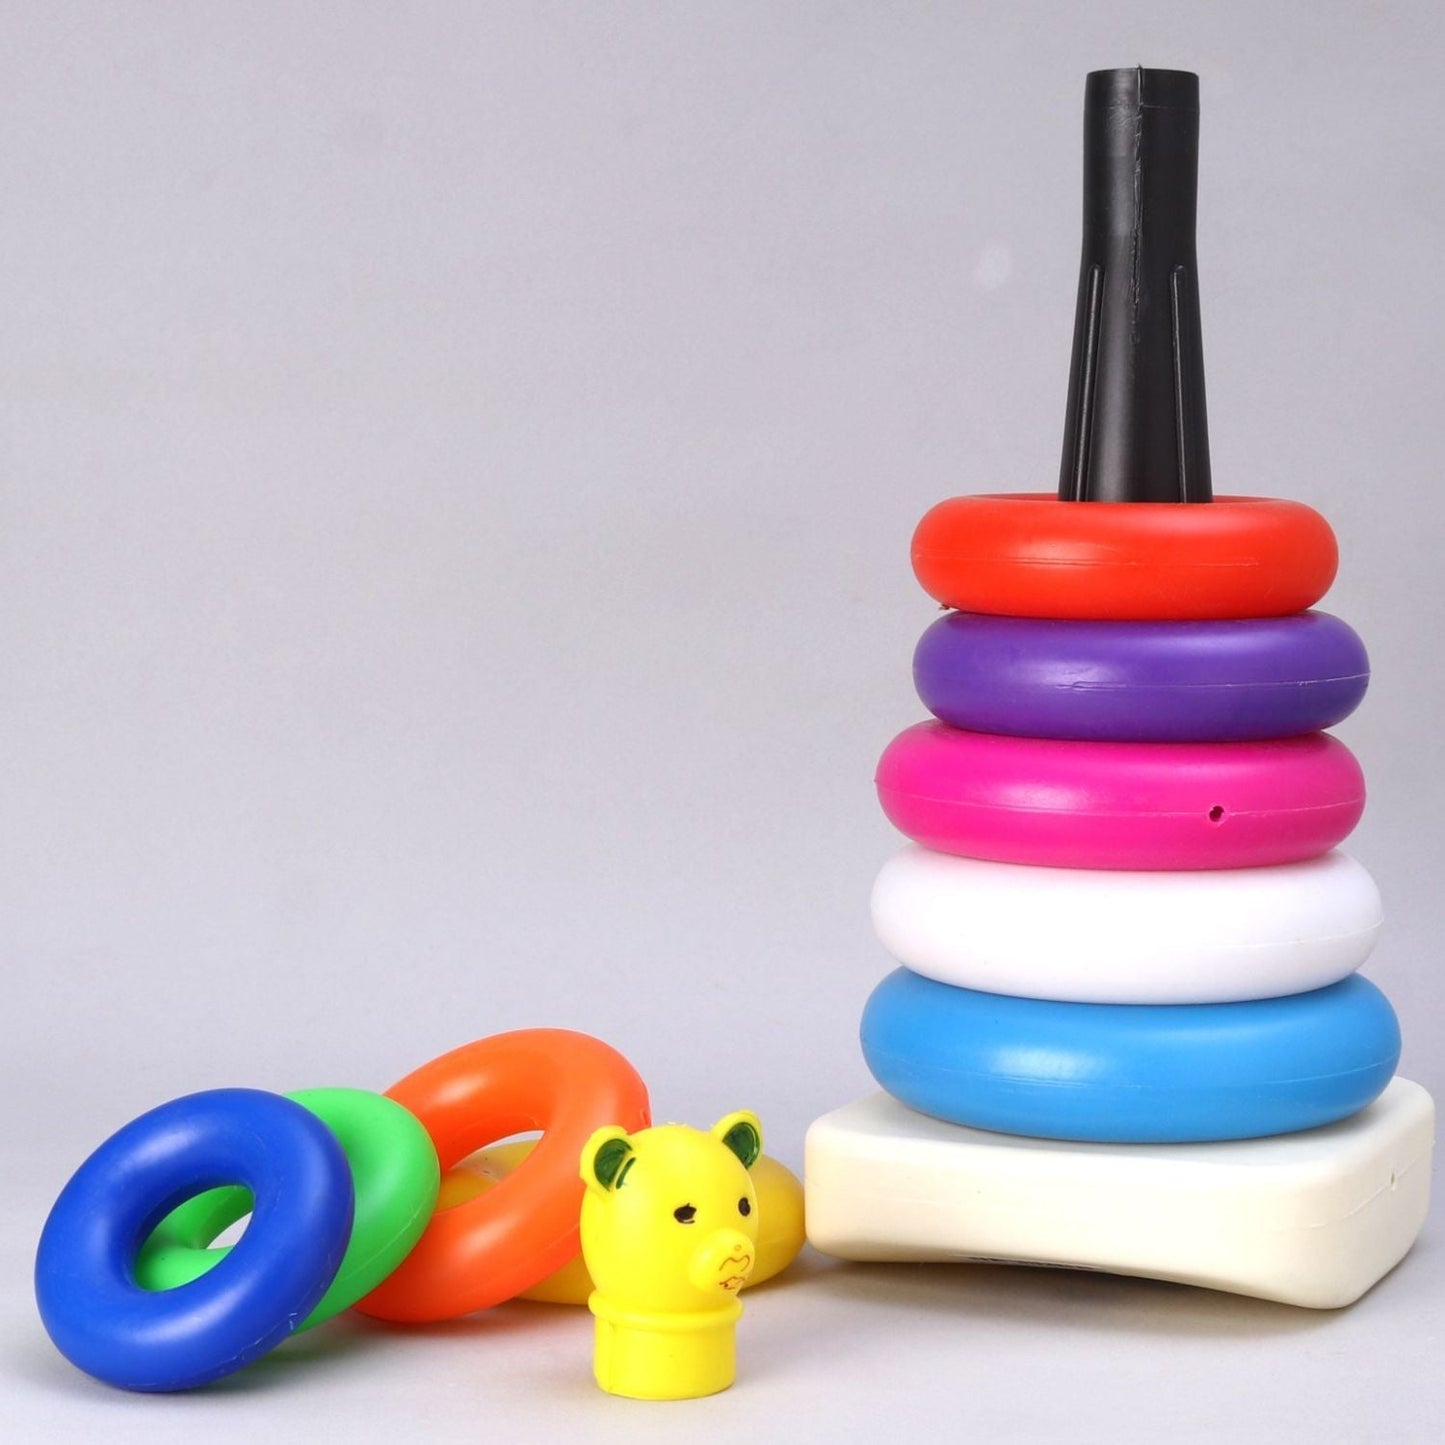 8015 Plastic Baby Kids Teddy Stacking Ring Jumbo Stack Up Educational Toy 9pc Dukandaily